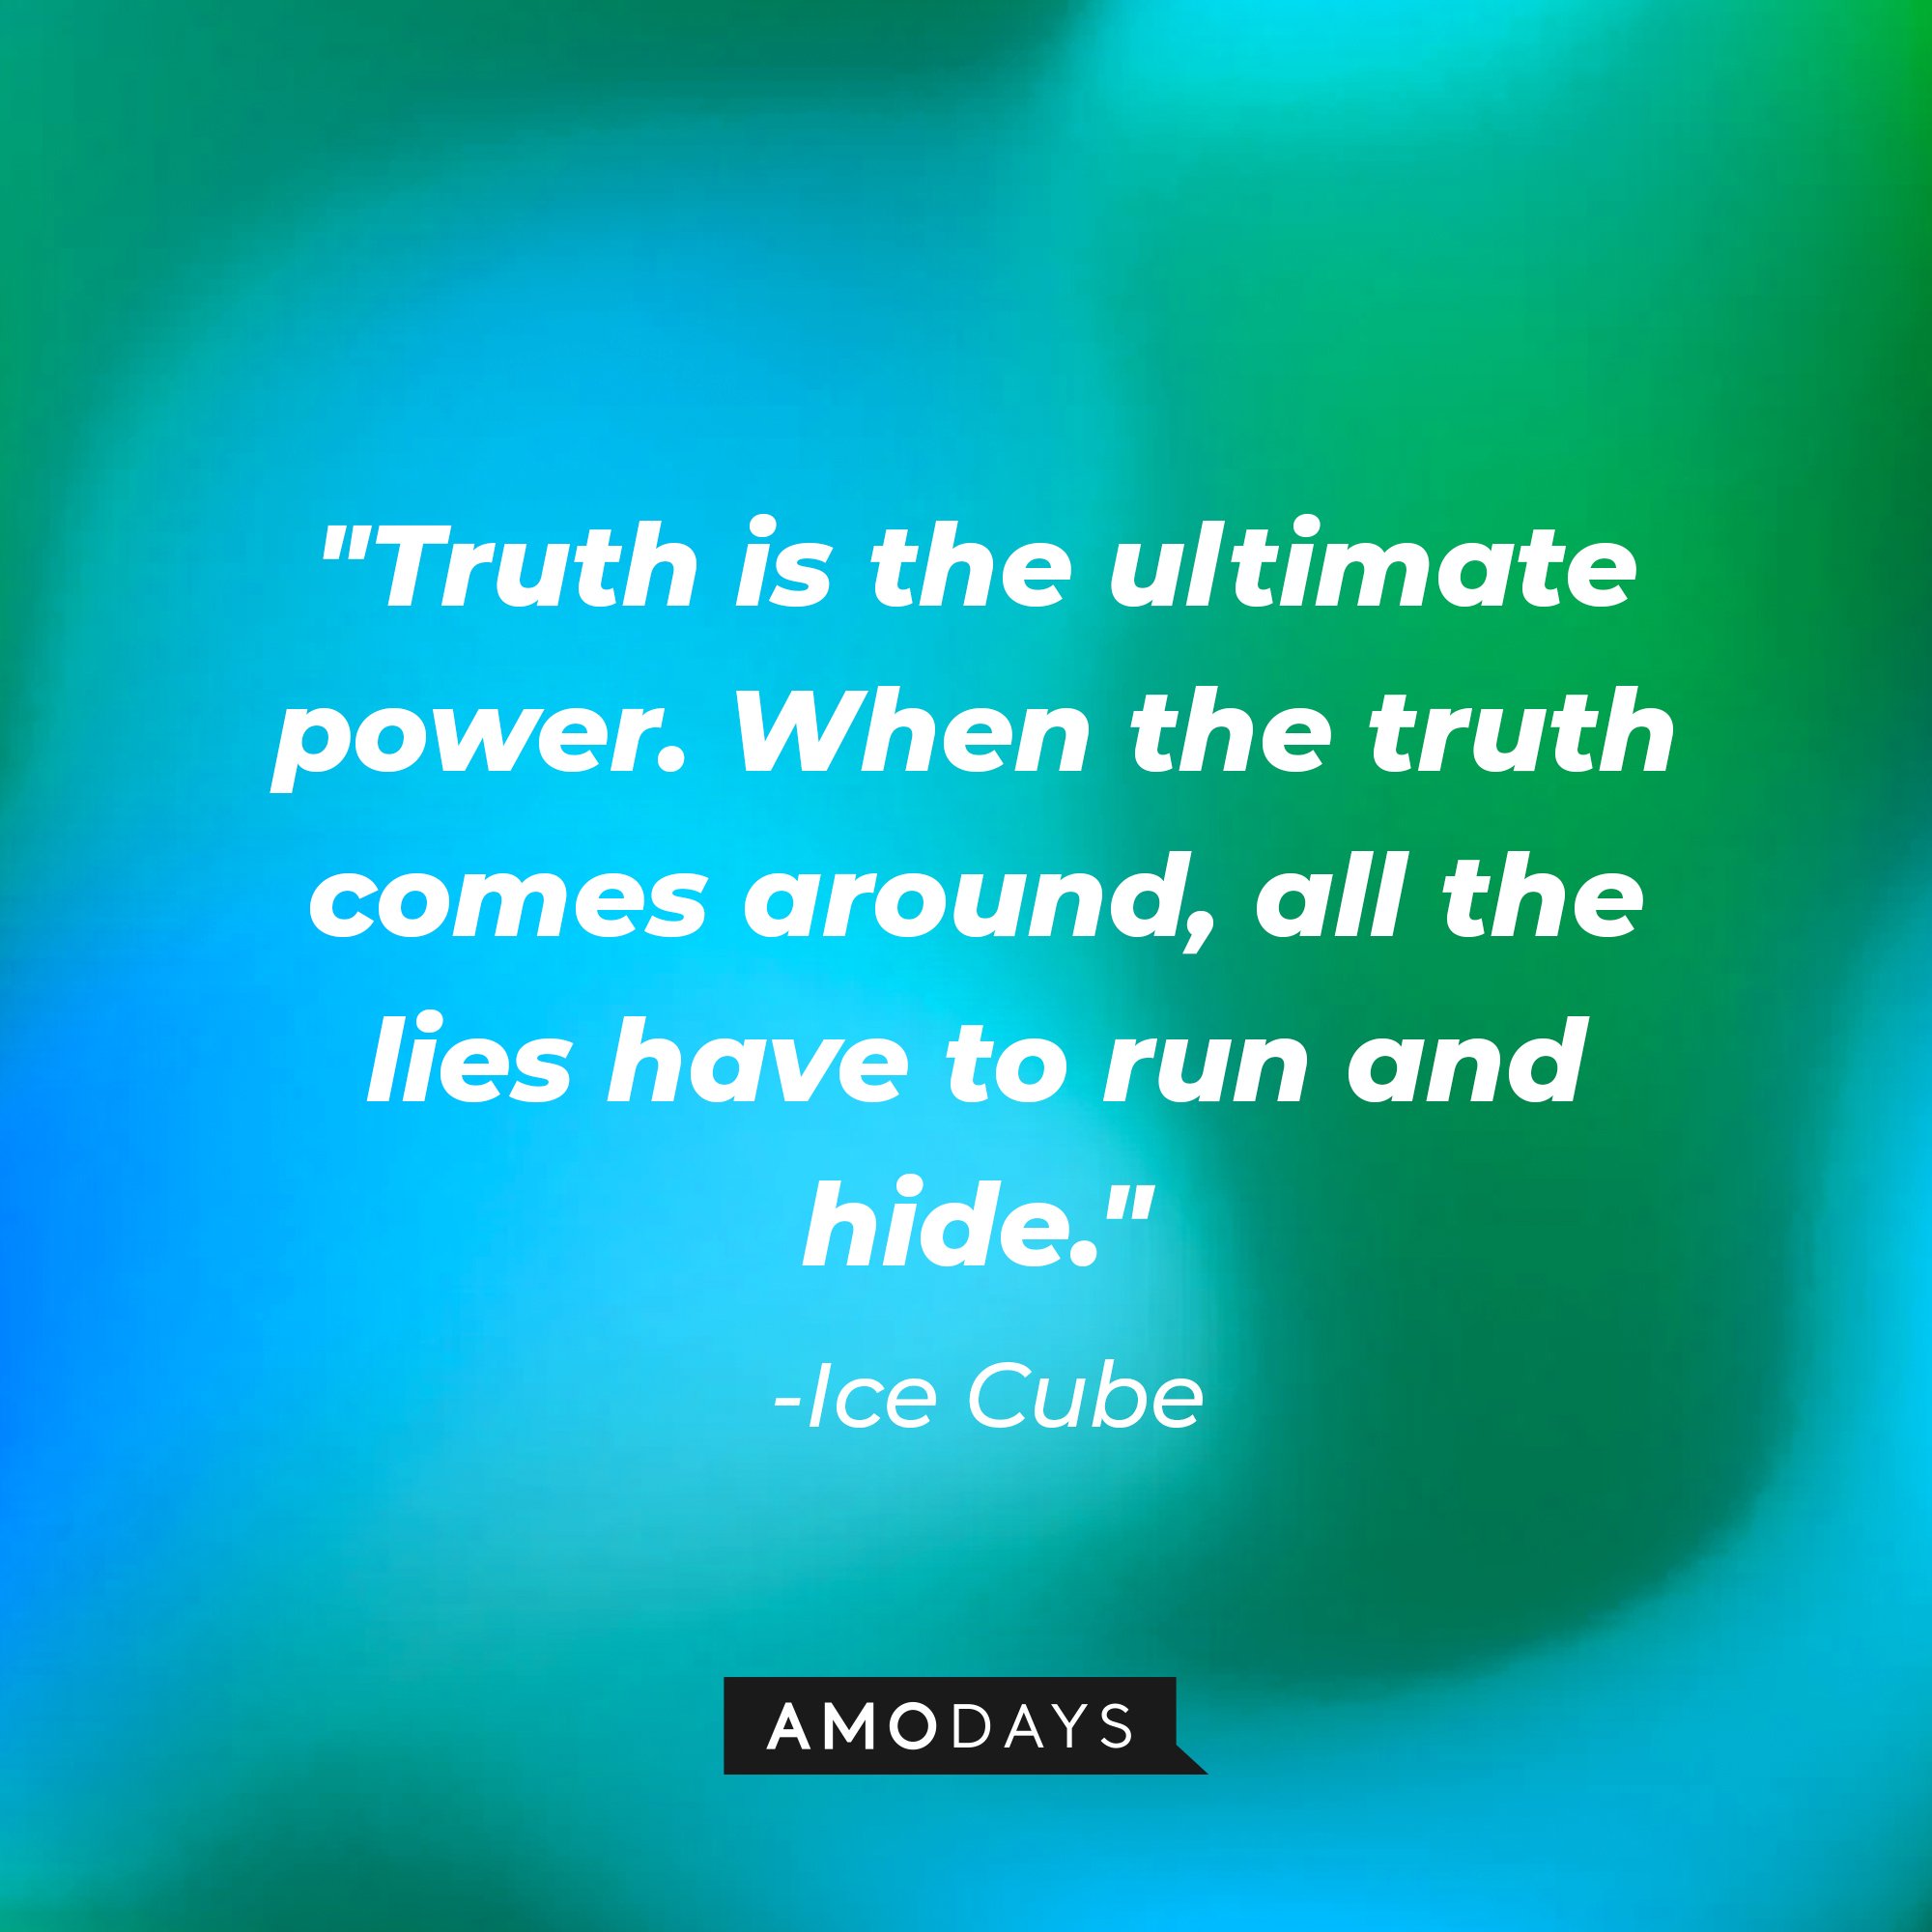 Ice Cube's quote: "Truth is the ultimate power. When the truth comes around, all the lies have to run and hide." — Ice Cube | Image: AmoDays